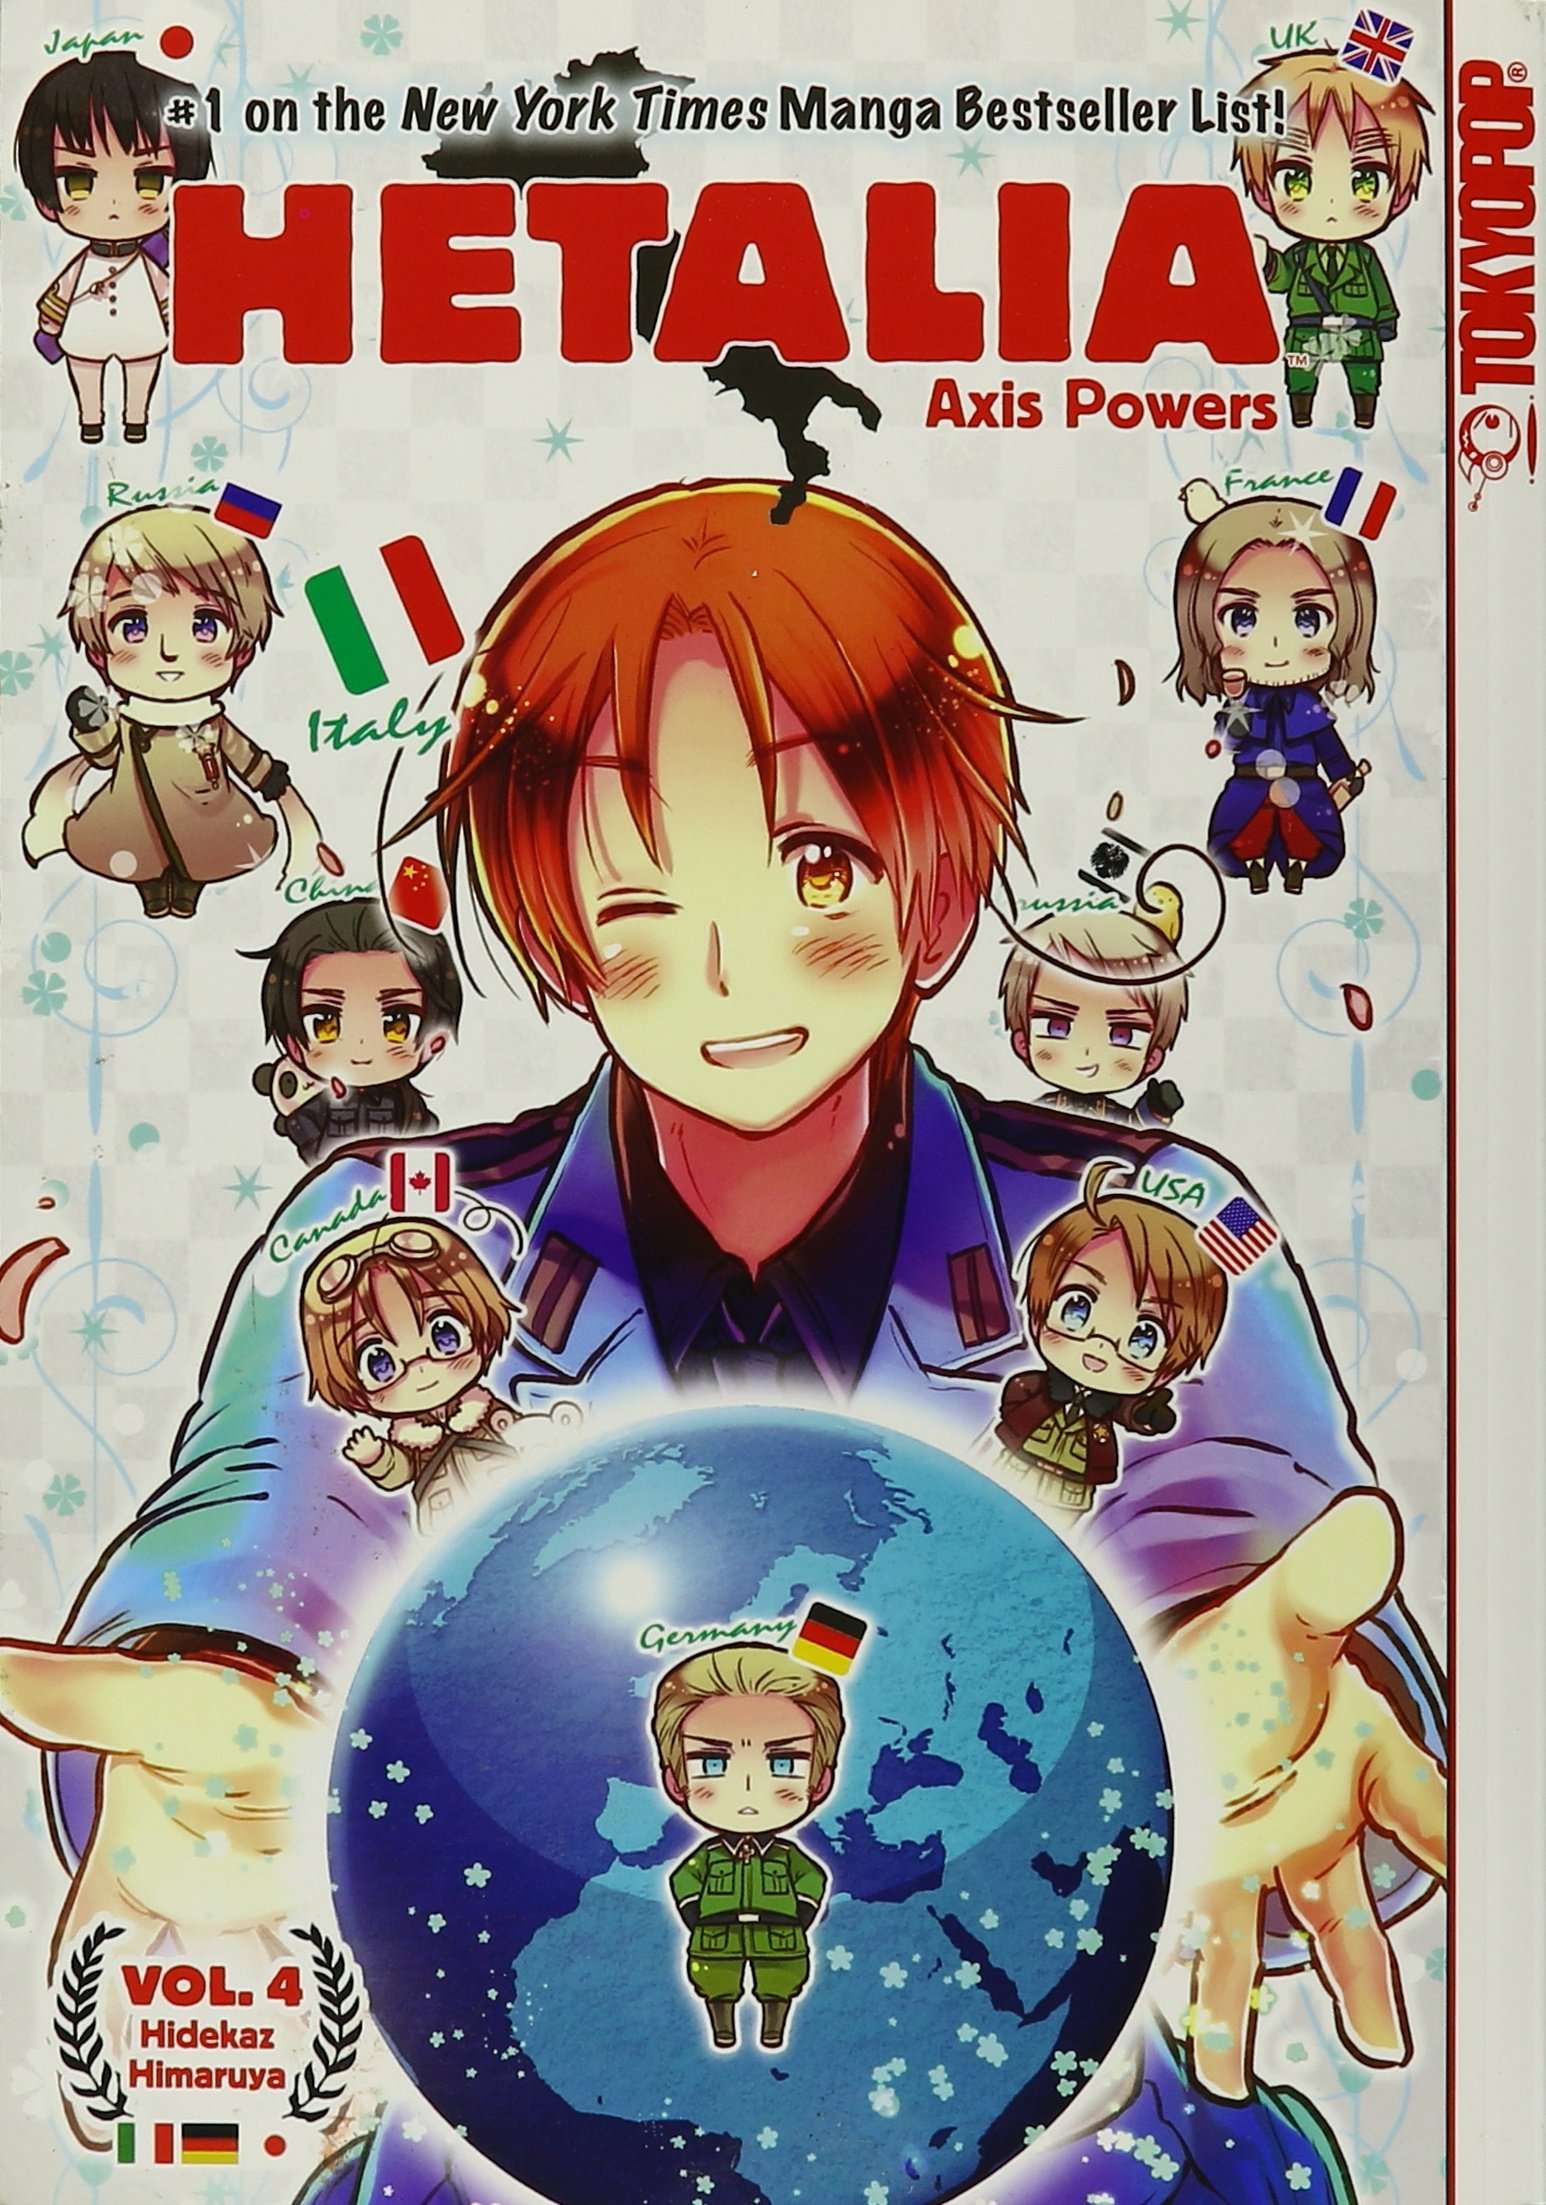 Thoughts on the Chibitalia Scene in Hetalia: Axis Powers Episode 1